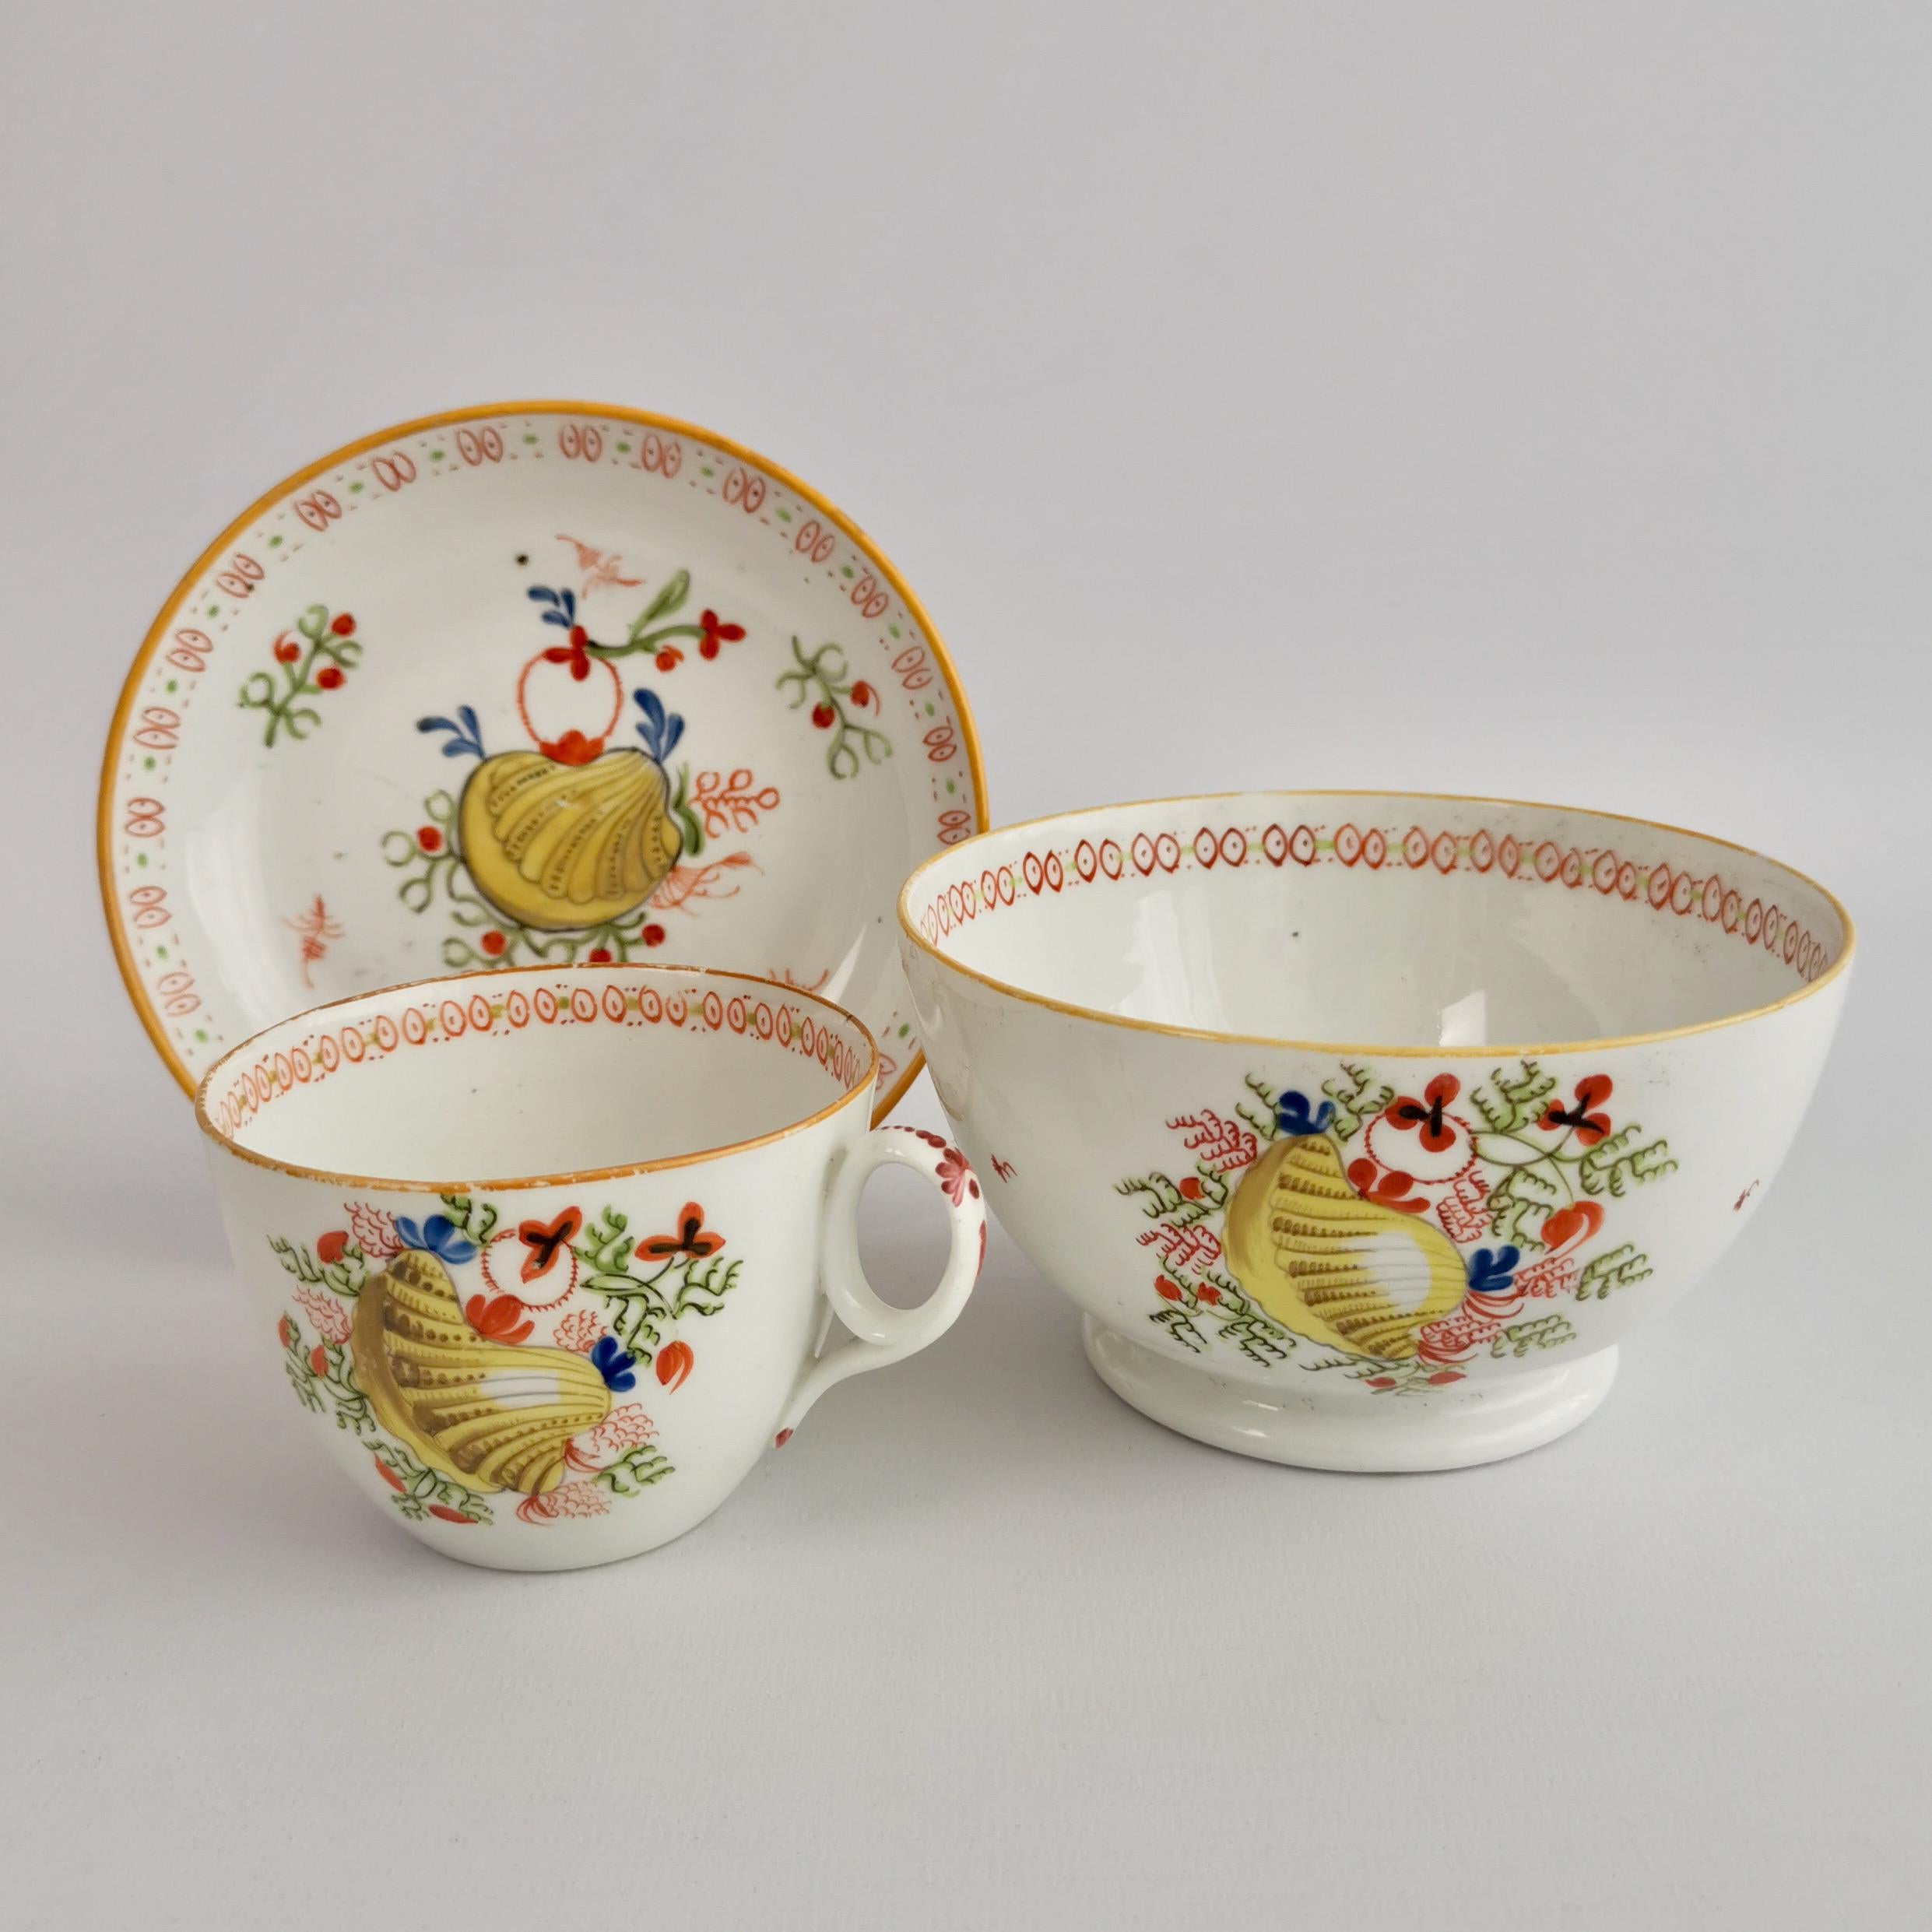 Early 19th Century New Hall Porcelain Teacup, Yellow Shell Pattern 1045, ca 1810